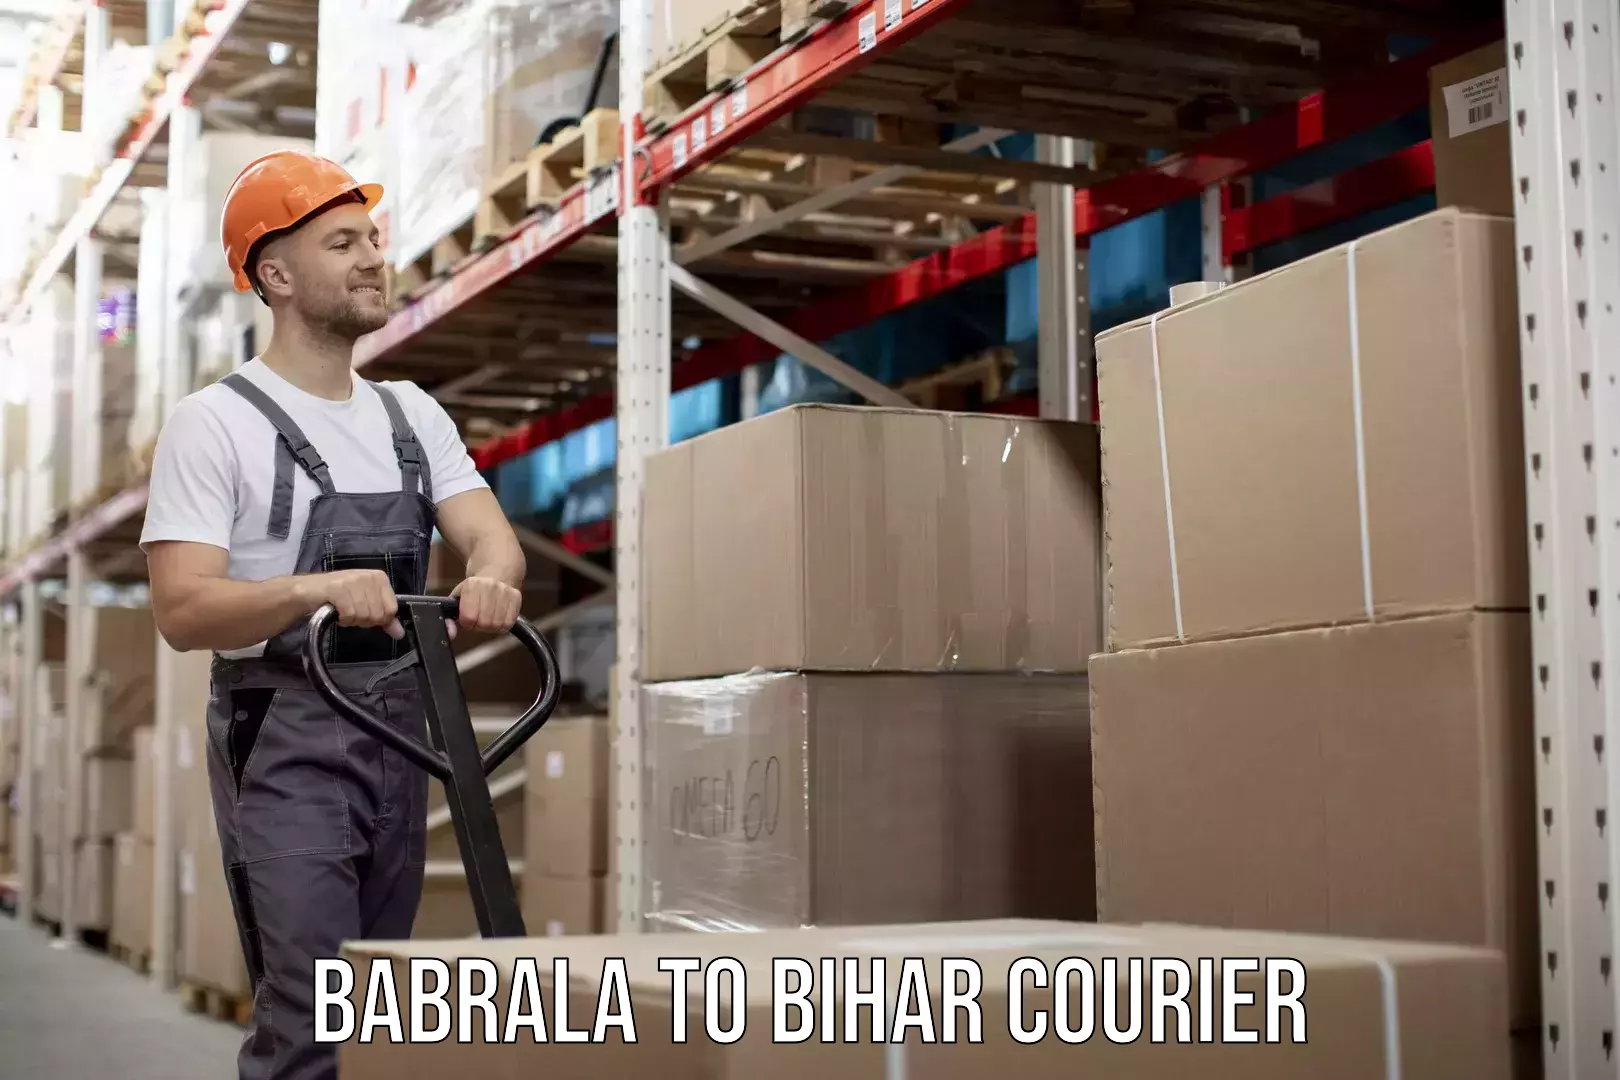 Reliable courier service Babrala to Fatwah